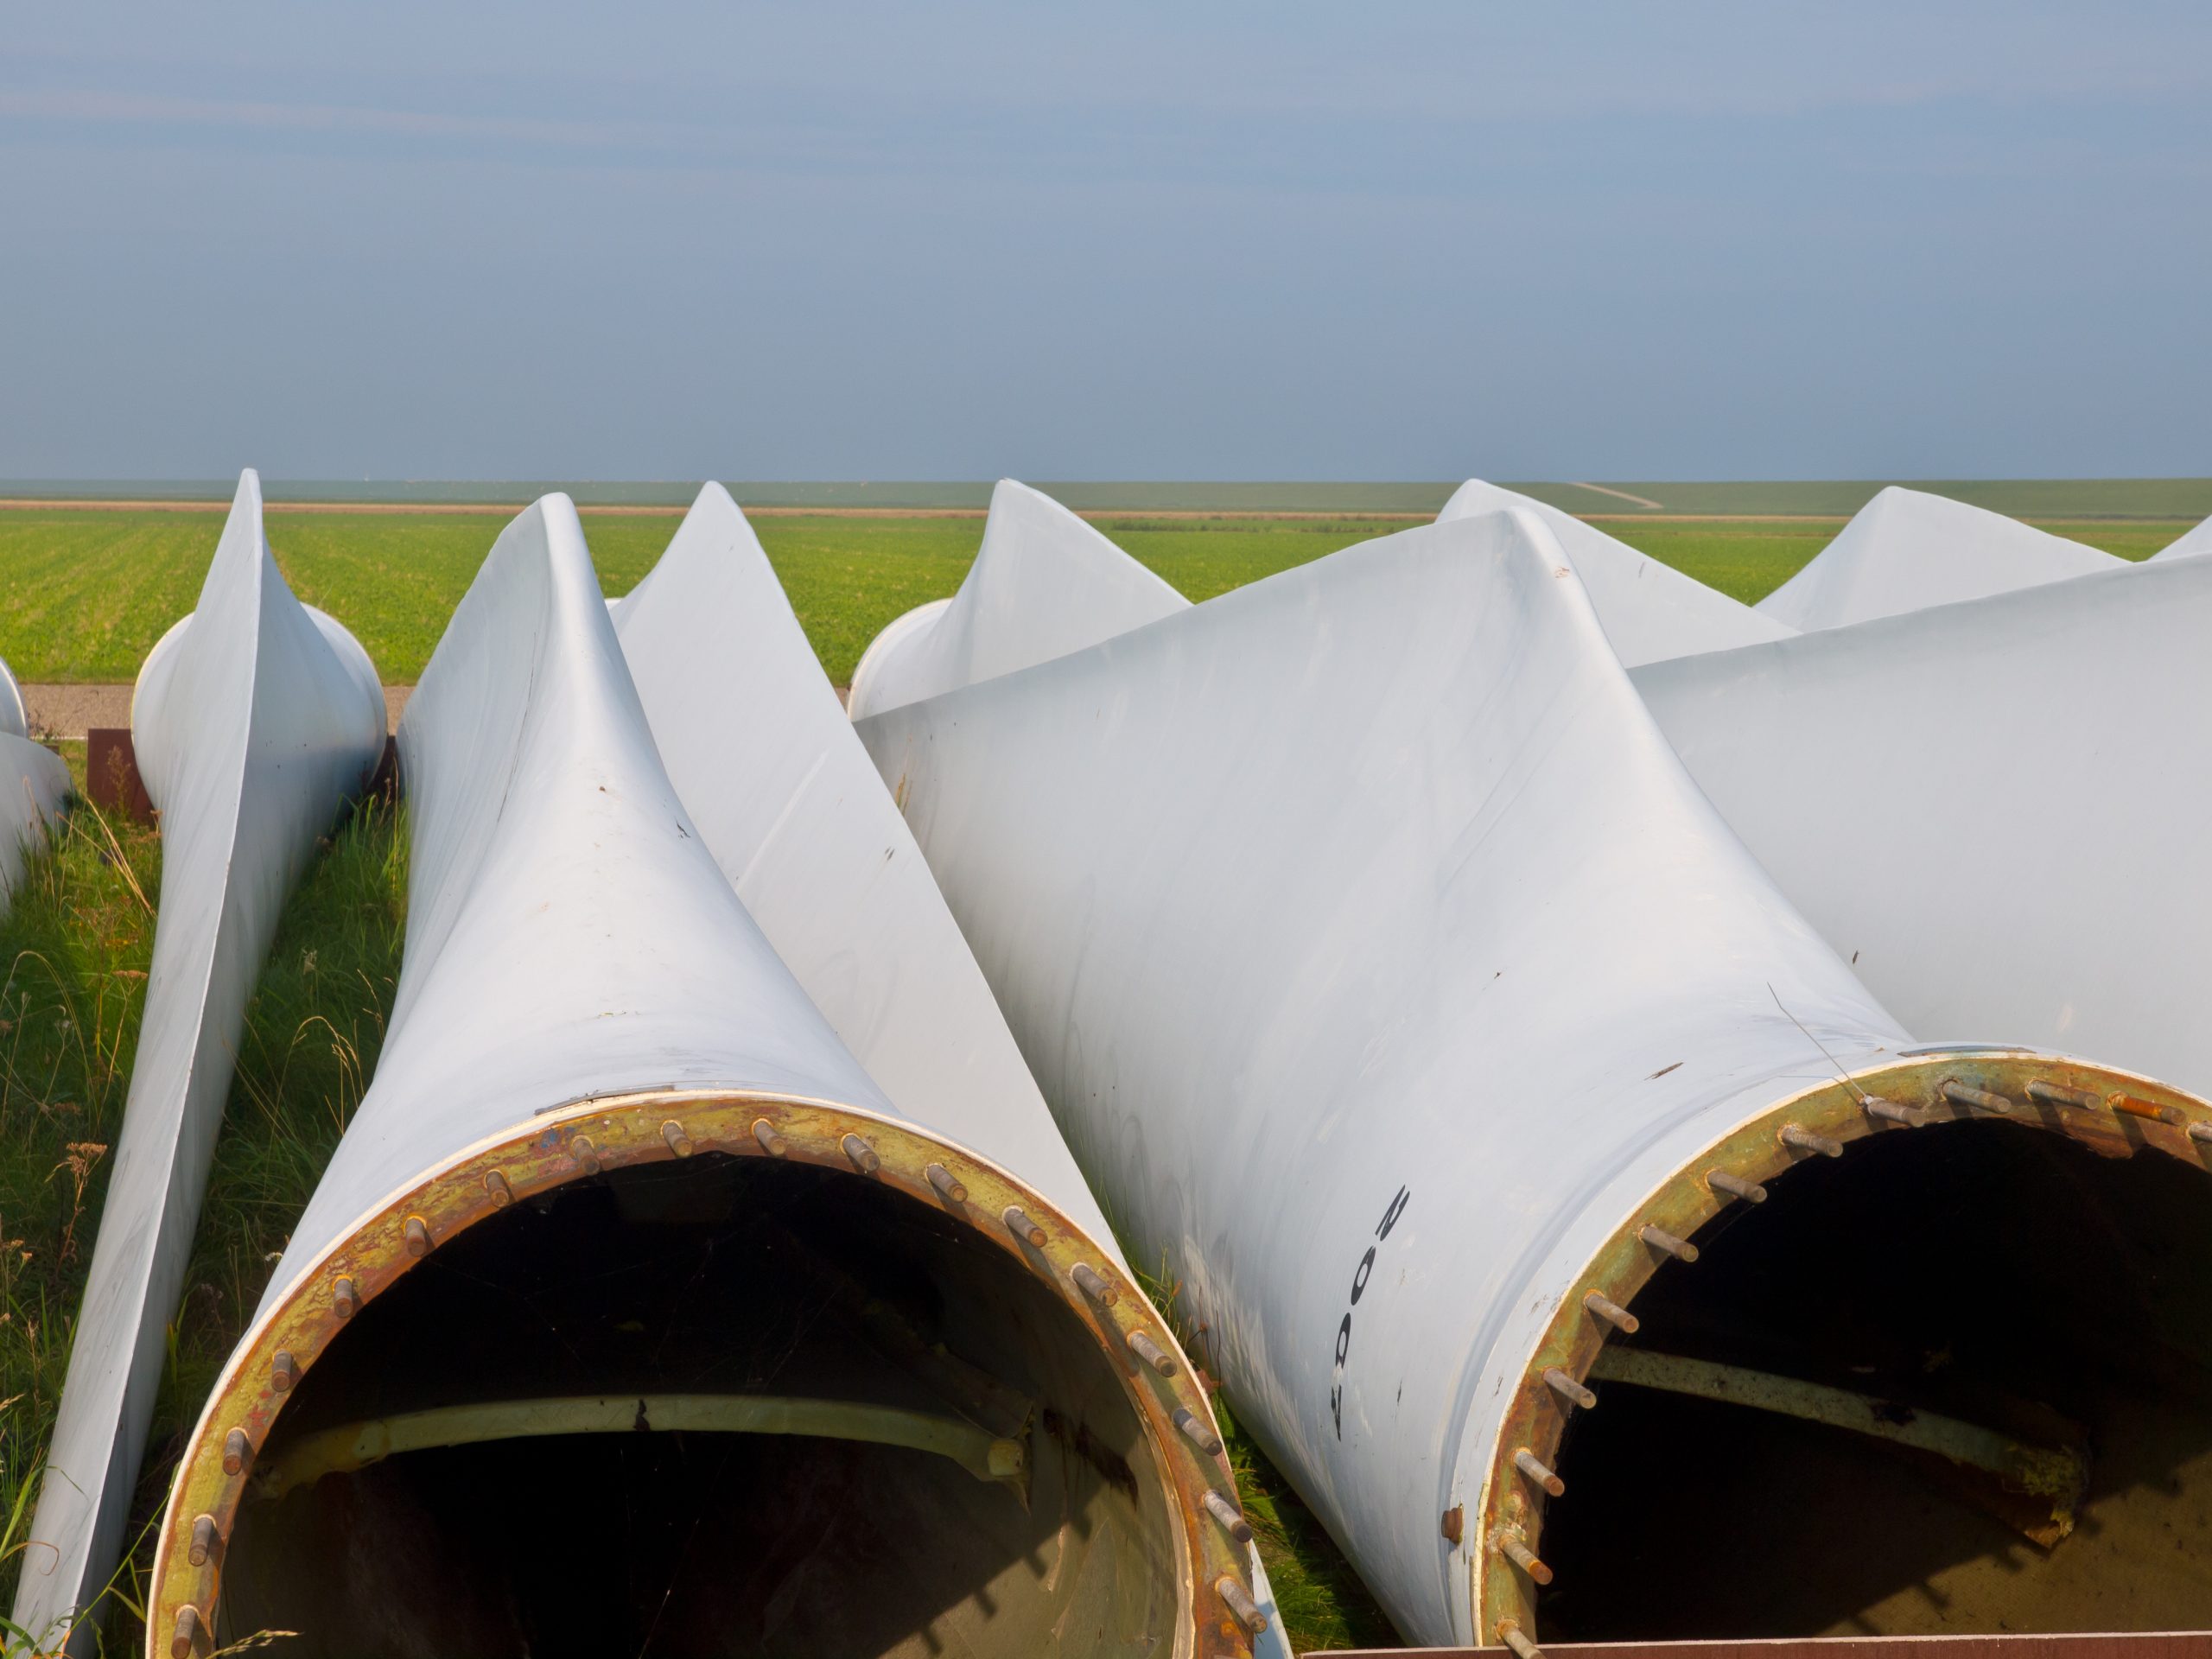 Enva launches wind turbine blade recycling service 